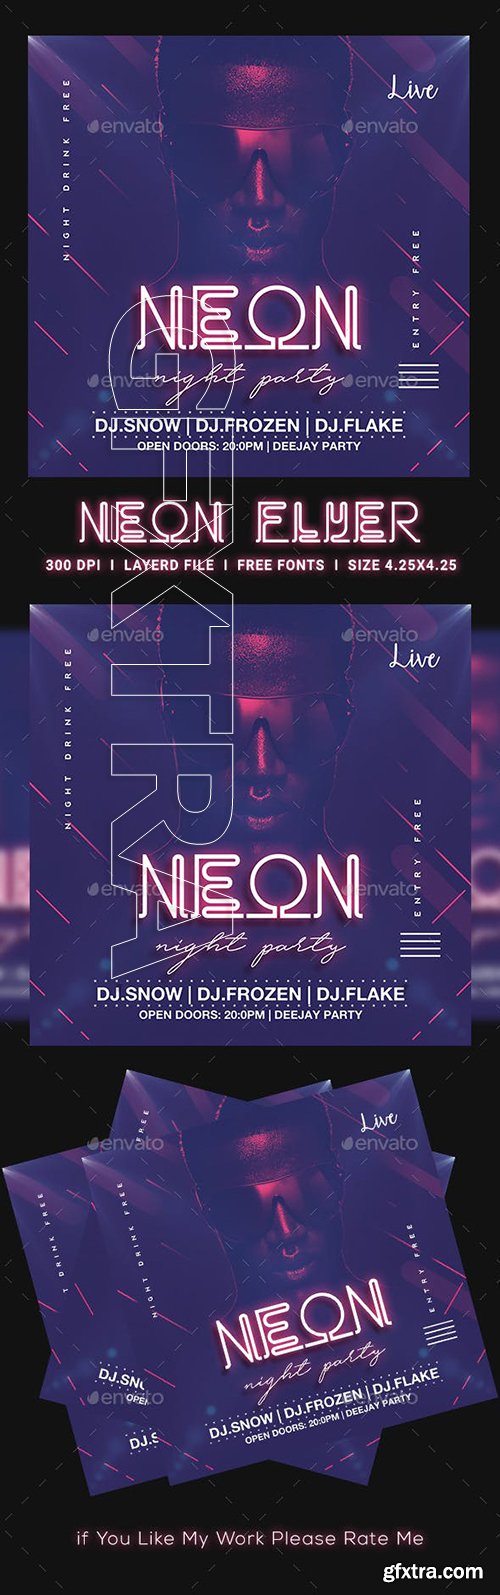 GraphicRiver - Neon Party Flyer 23147249